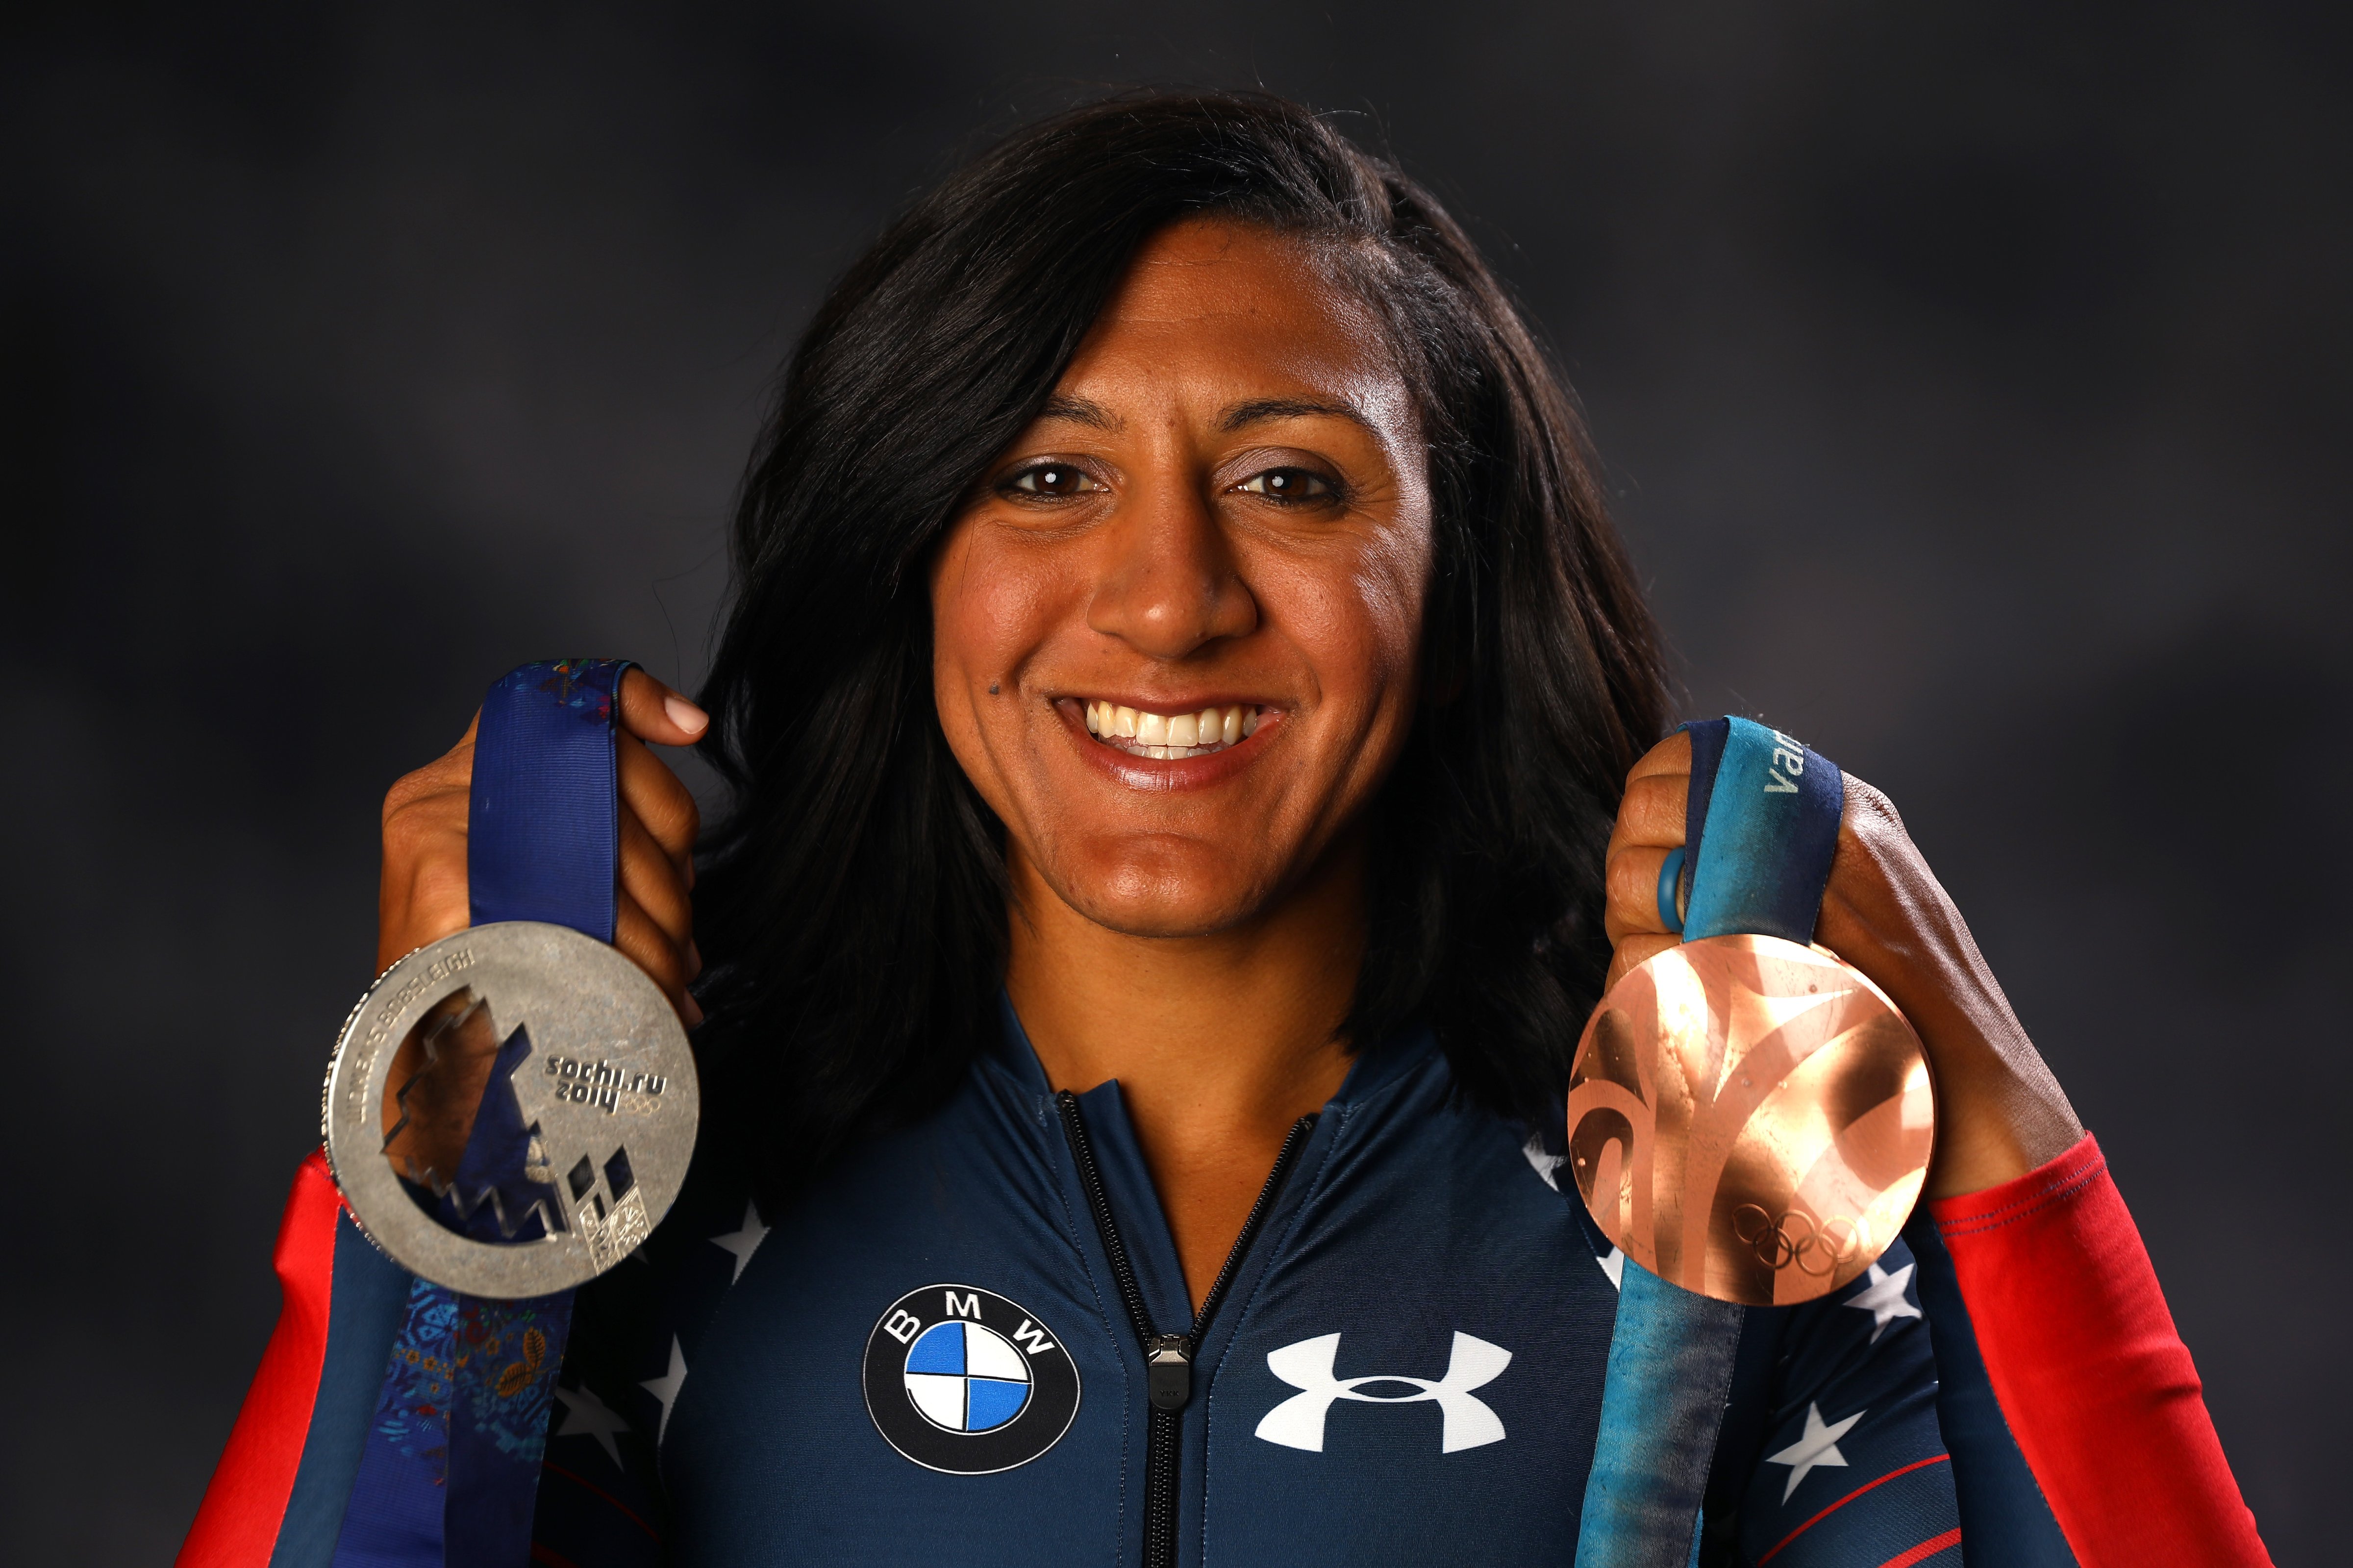 Bobsledder Elana Meyers Taylor poses for a portrait during the Team USA Media Summit ahead of the PyeongChang 2018 Olympic Winter Games on September 25, 2017 in Park City, Utah. (Ezra Shaw—Getty Images)